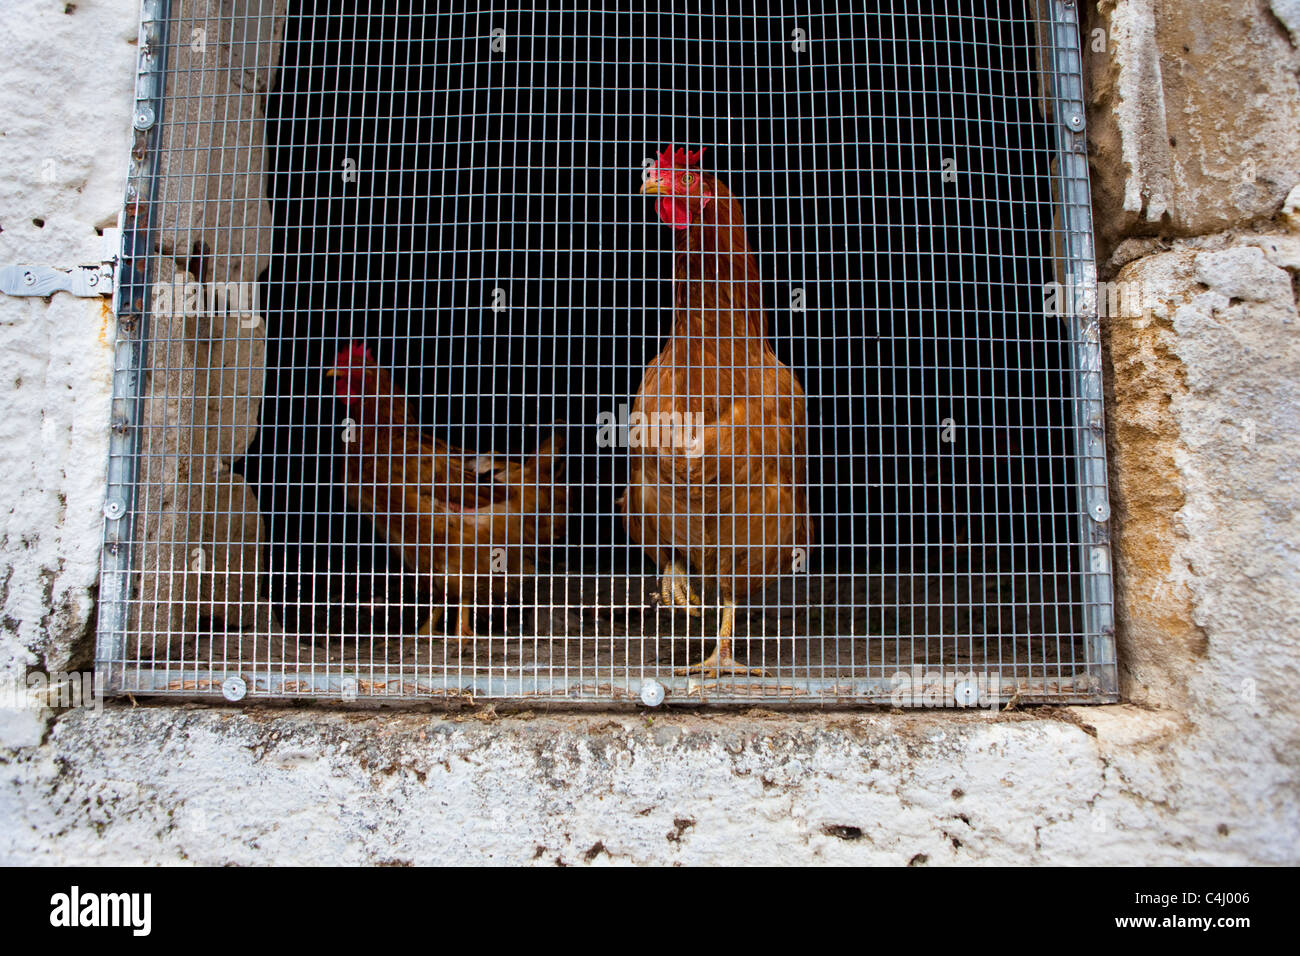 Hens in a chicken run, in the ancient Hellenic city of Polyrinia, Crete. Stock Photo